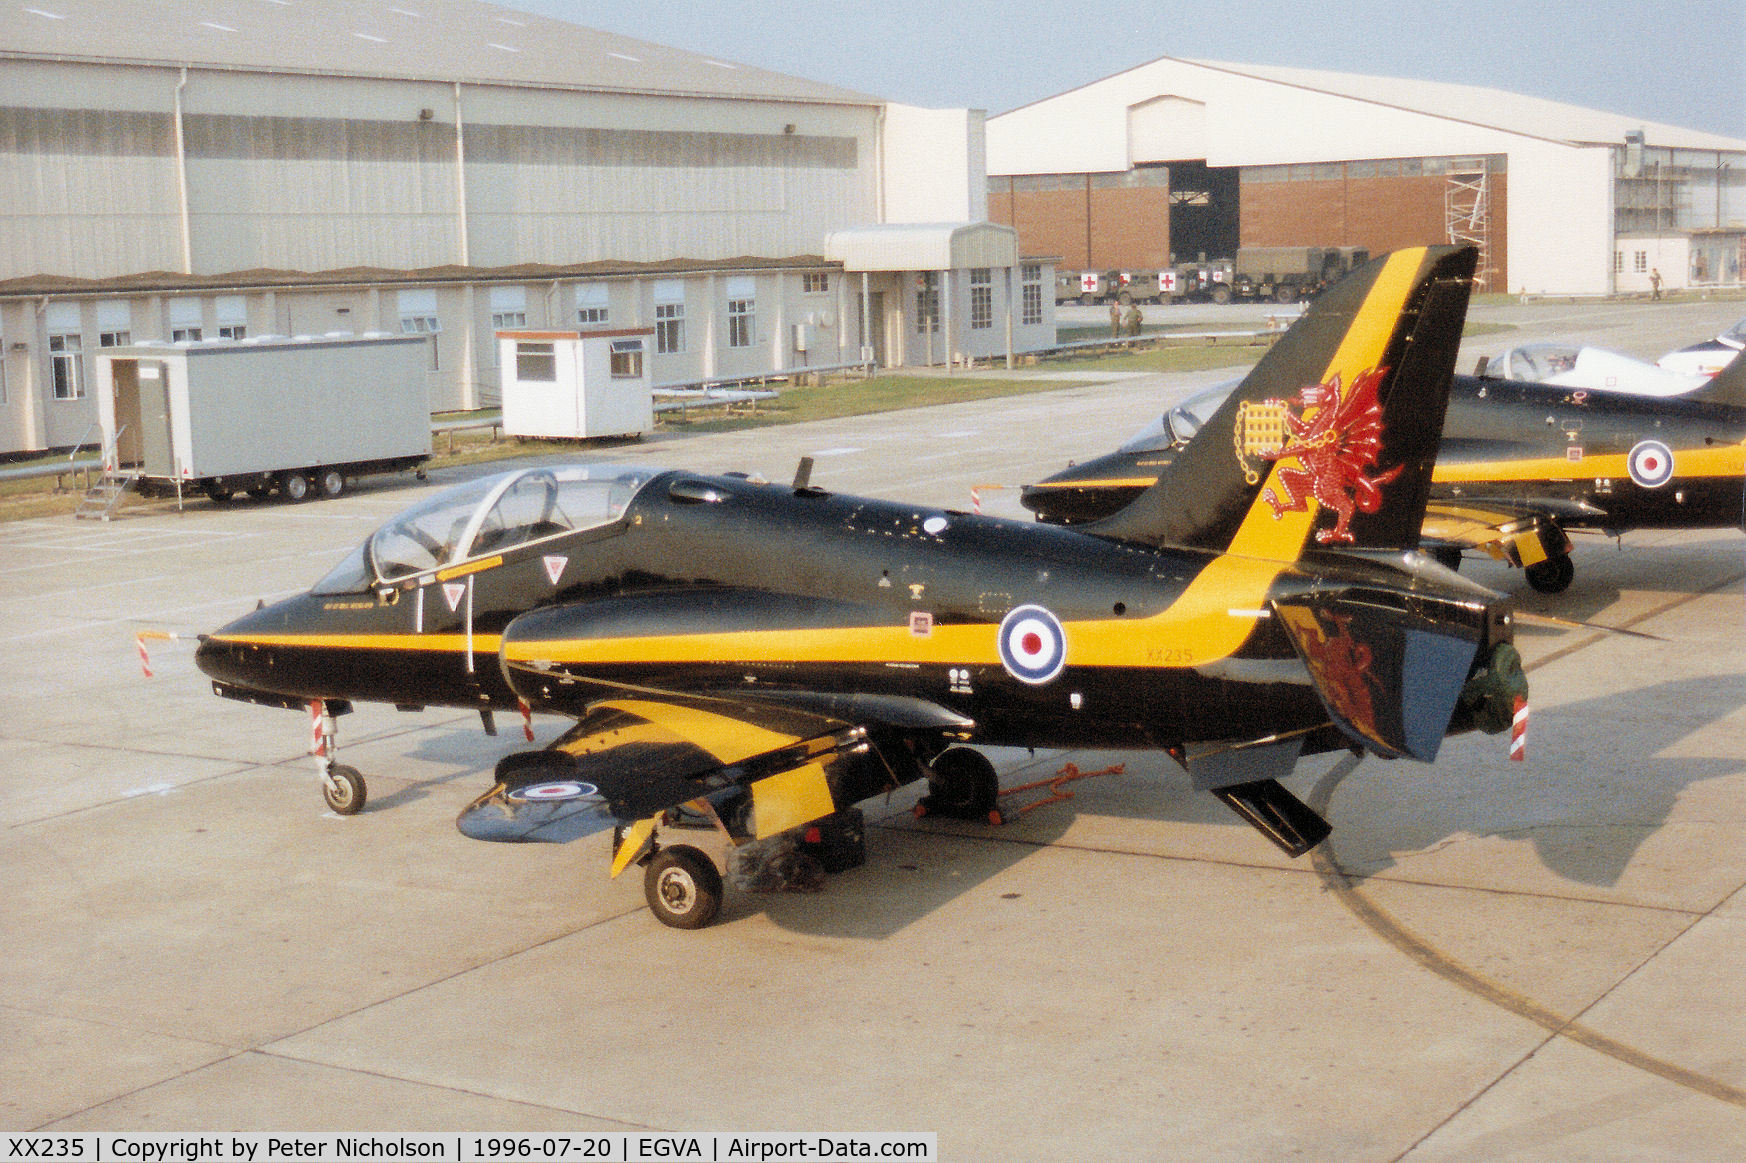 XX235, 1978 Hawker Siddeley Hawk T.1W C/N 071/312071, Hawk T.1A of 74[Reserve] Squadron at RAF Valley on the flight-line at the 1996 Royal Intnl Air Tattoo at RAF Fairford.